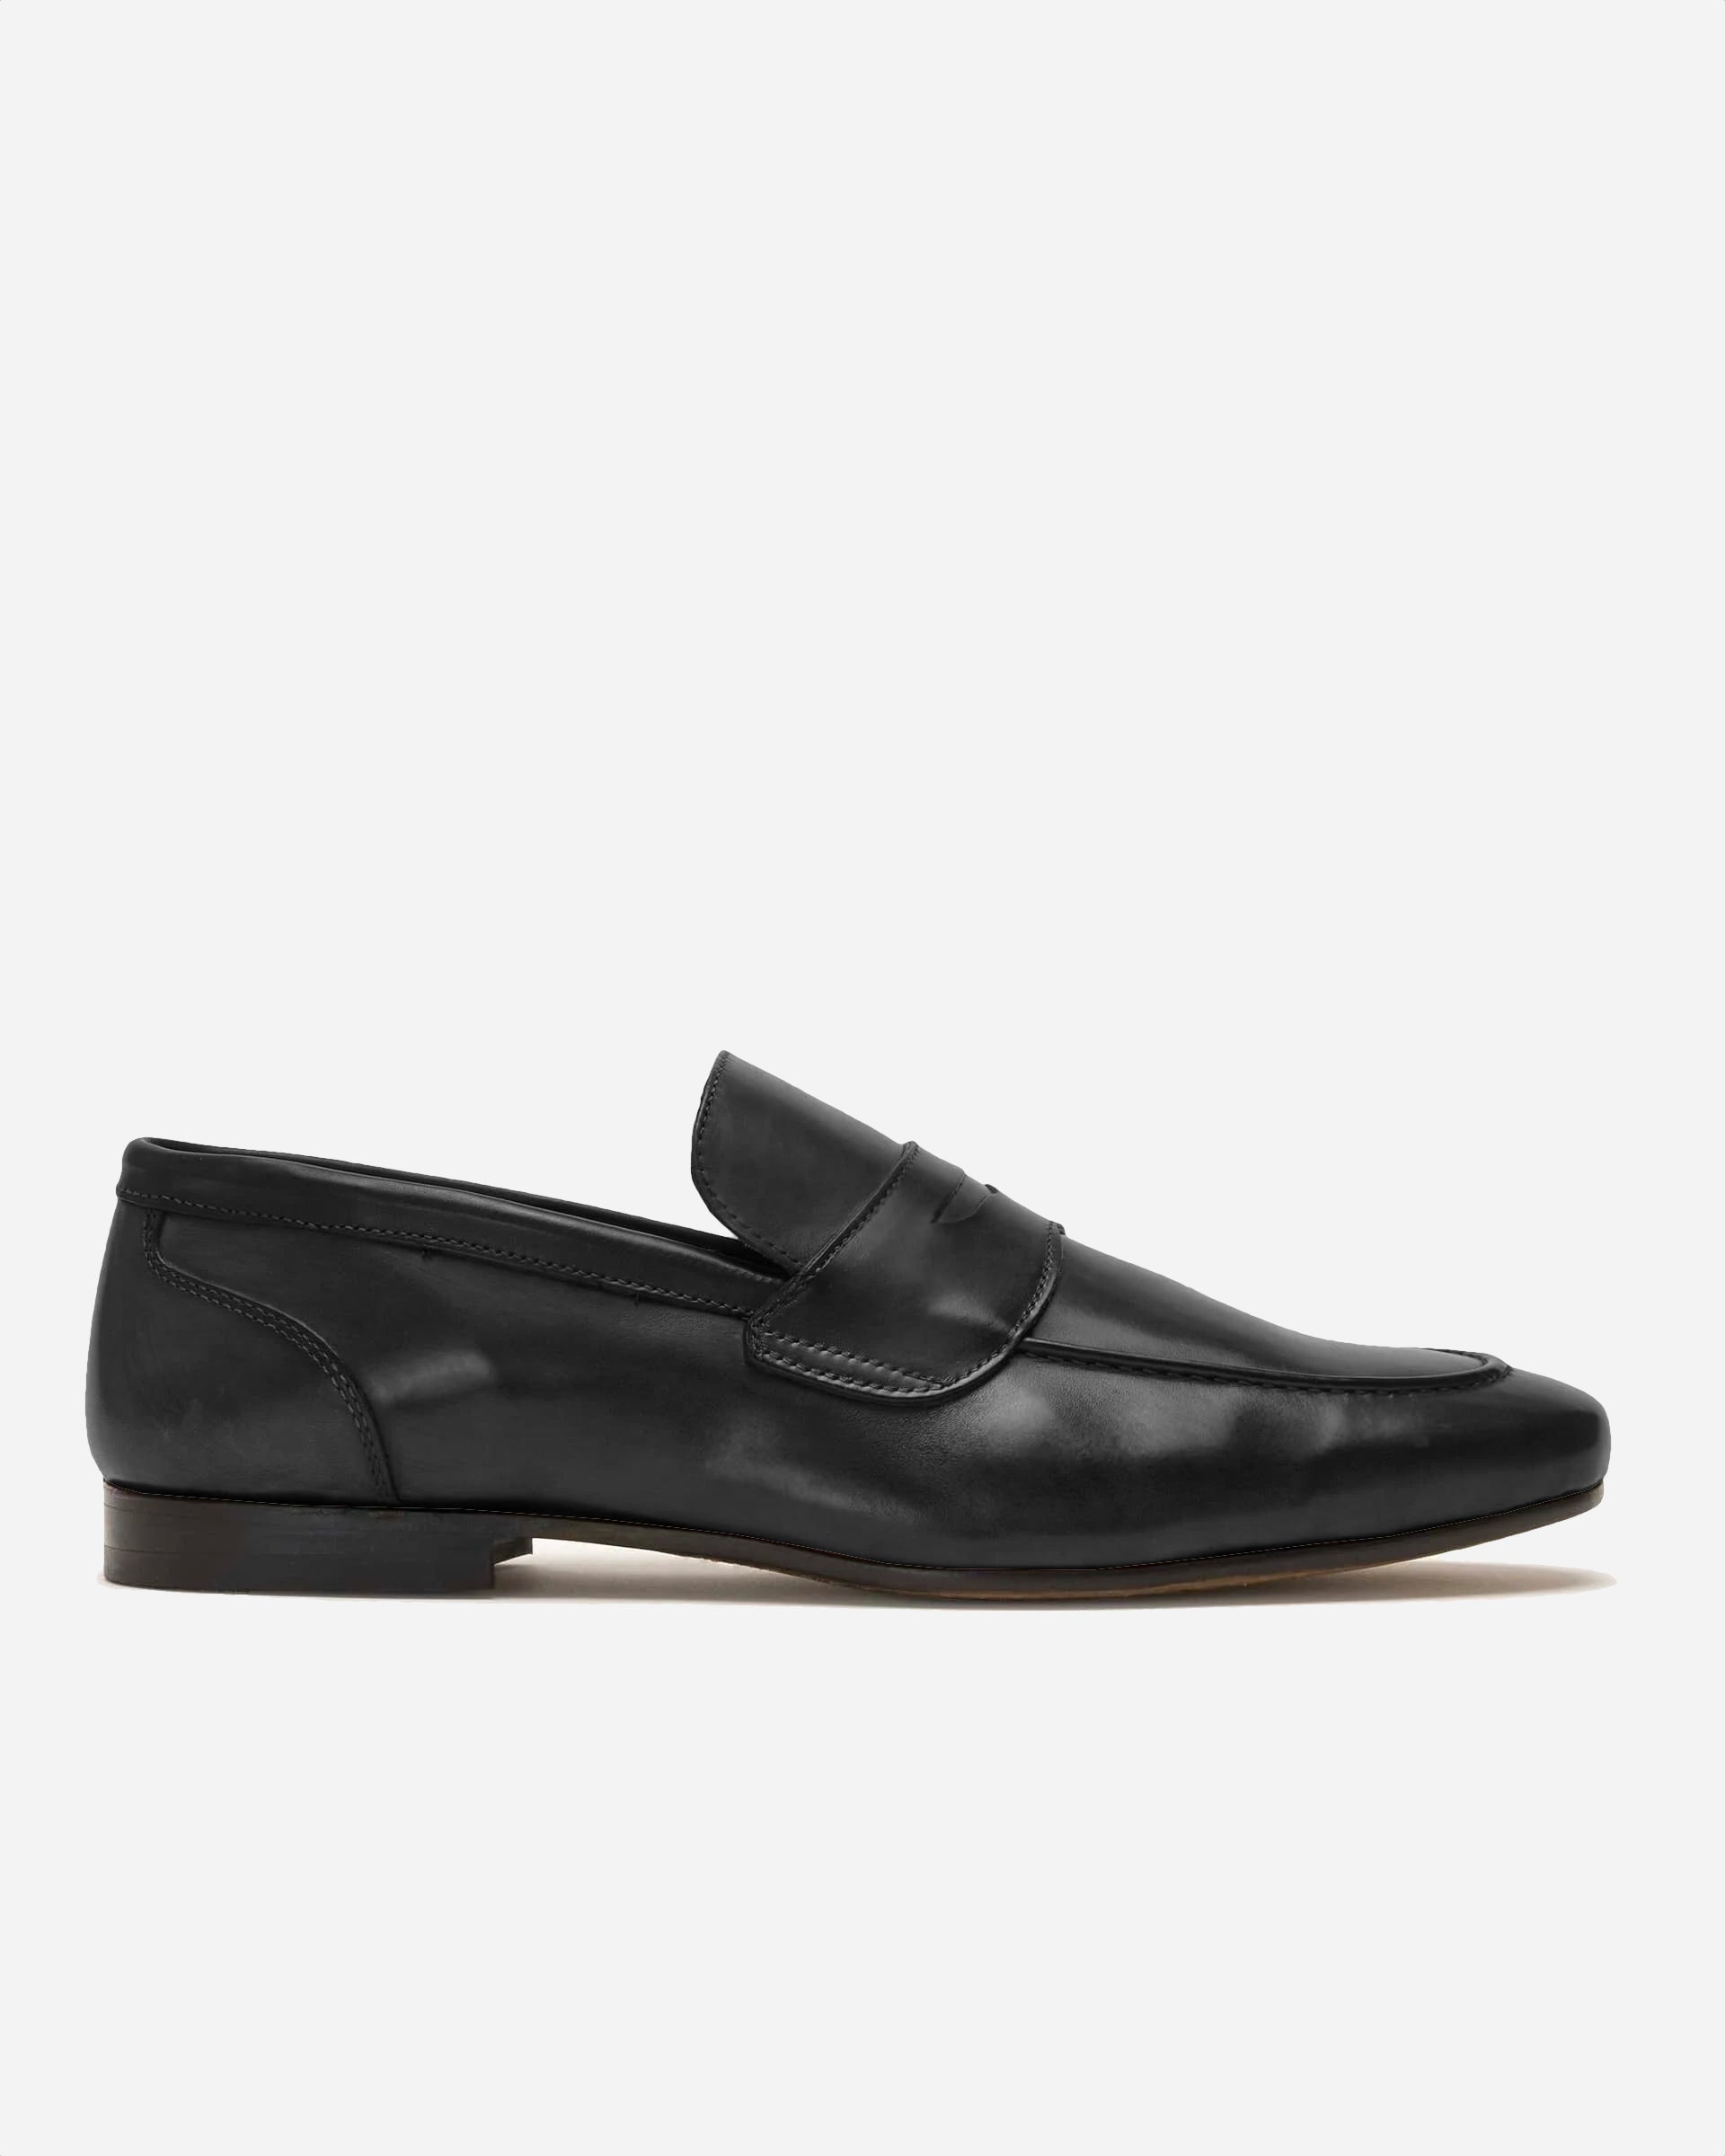 Penny Loafers - Men's Loafers at Menzclub